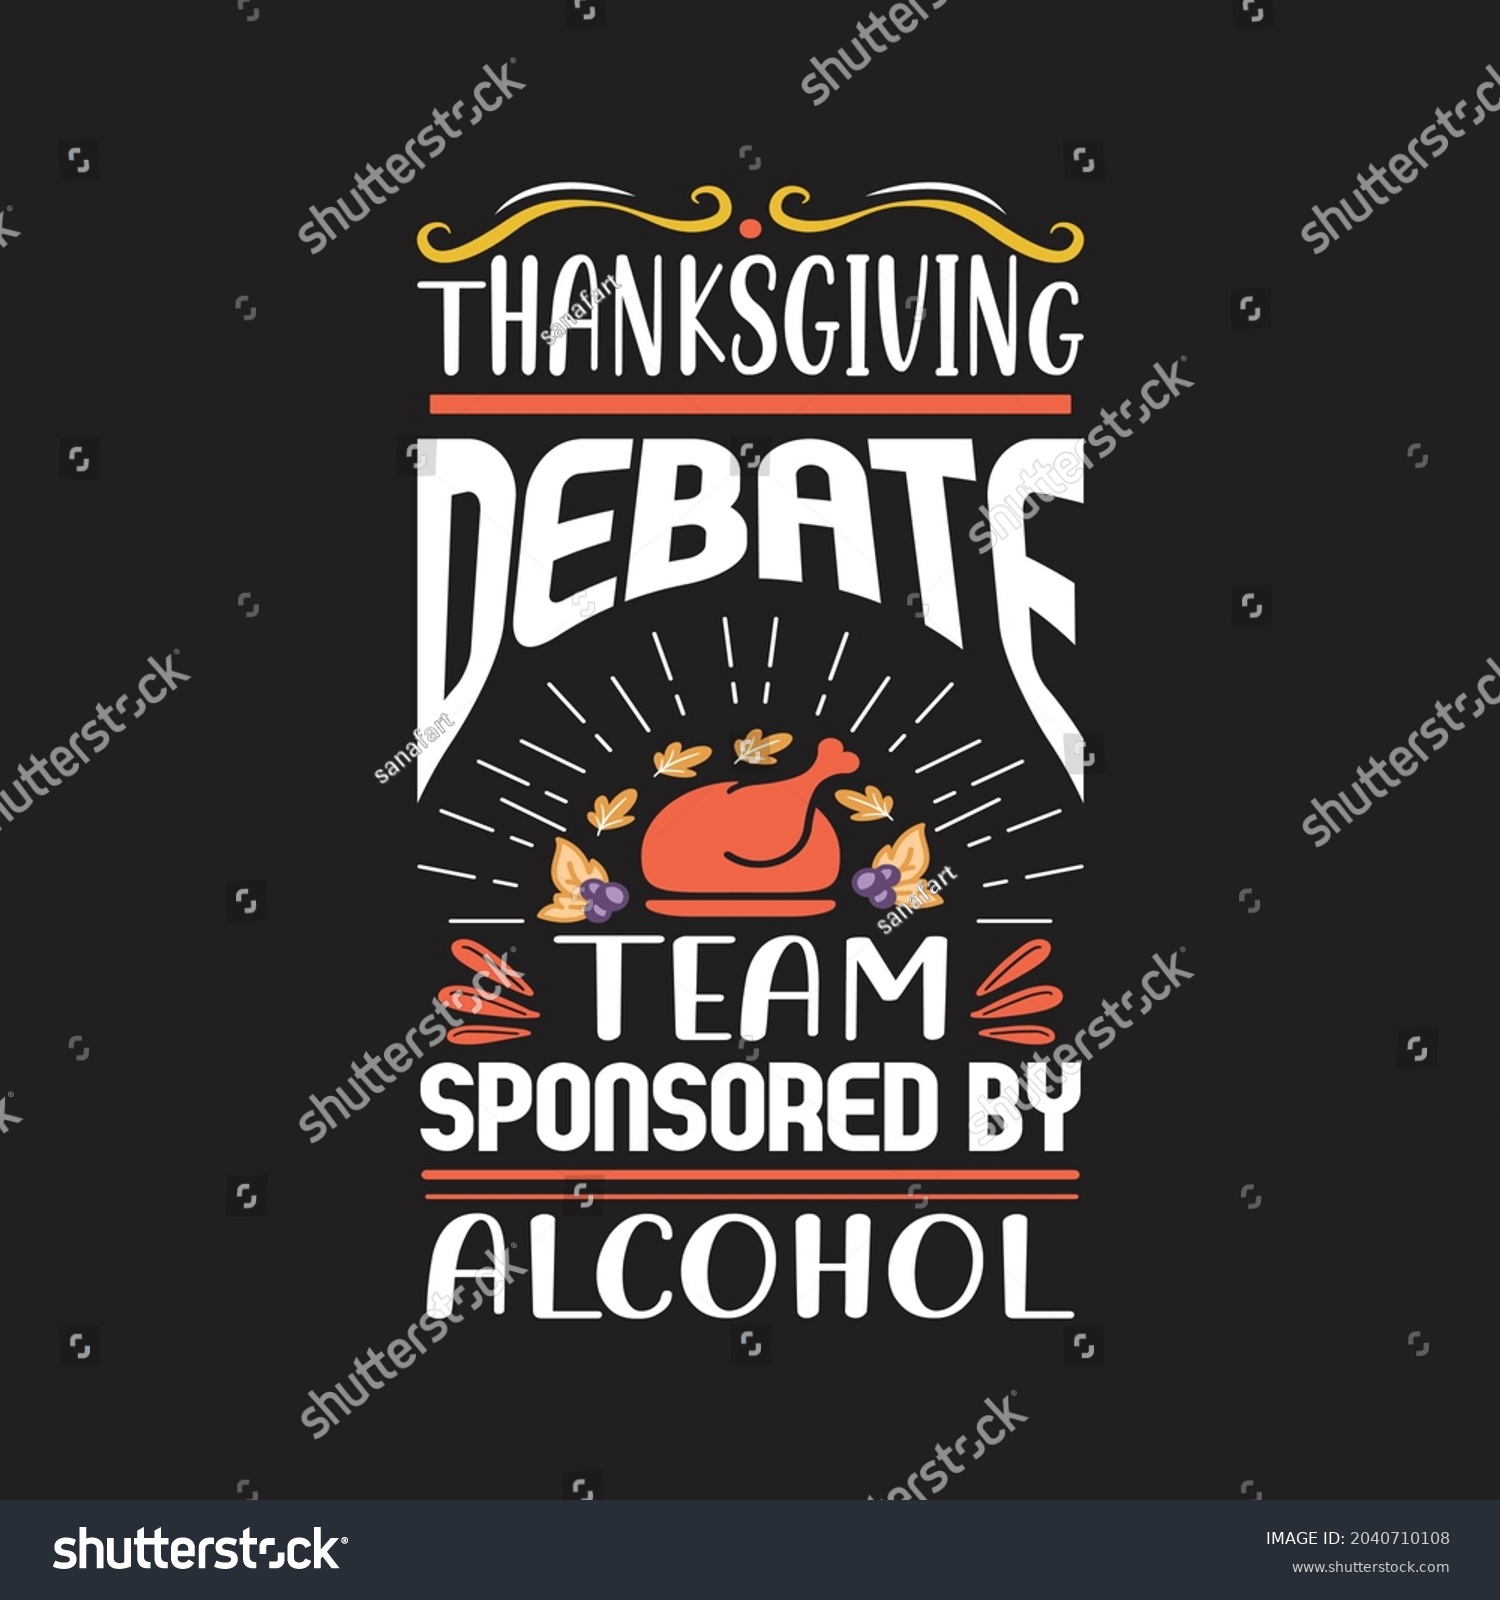 SVG of Thanksgiving debate team sponsored by alcohol - thanksgiving t shirt design and typographic vector. svg